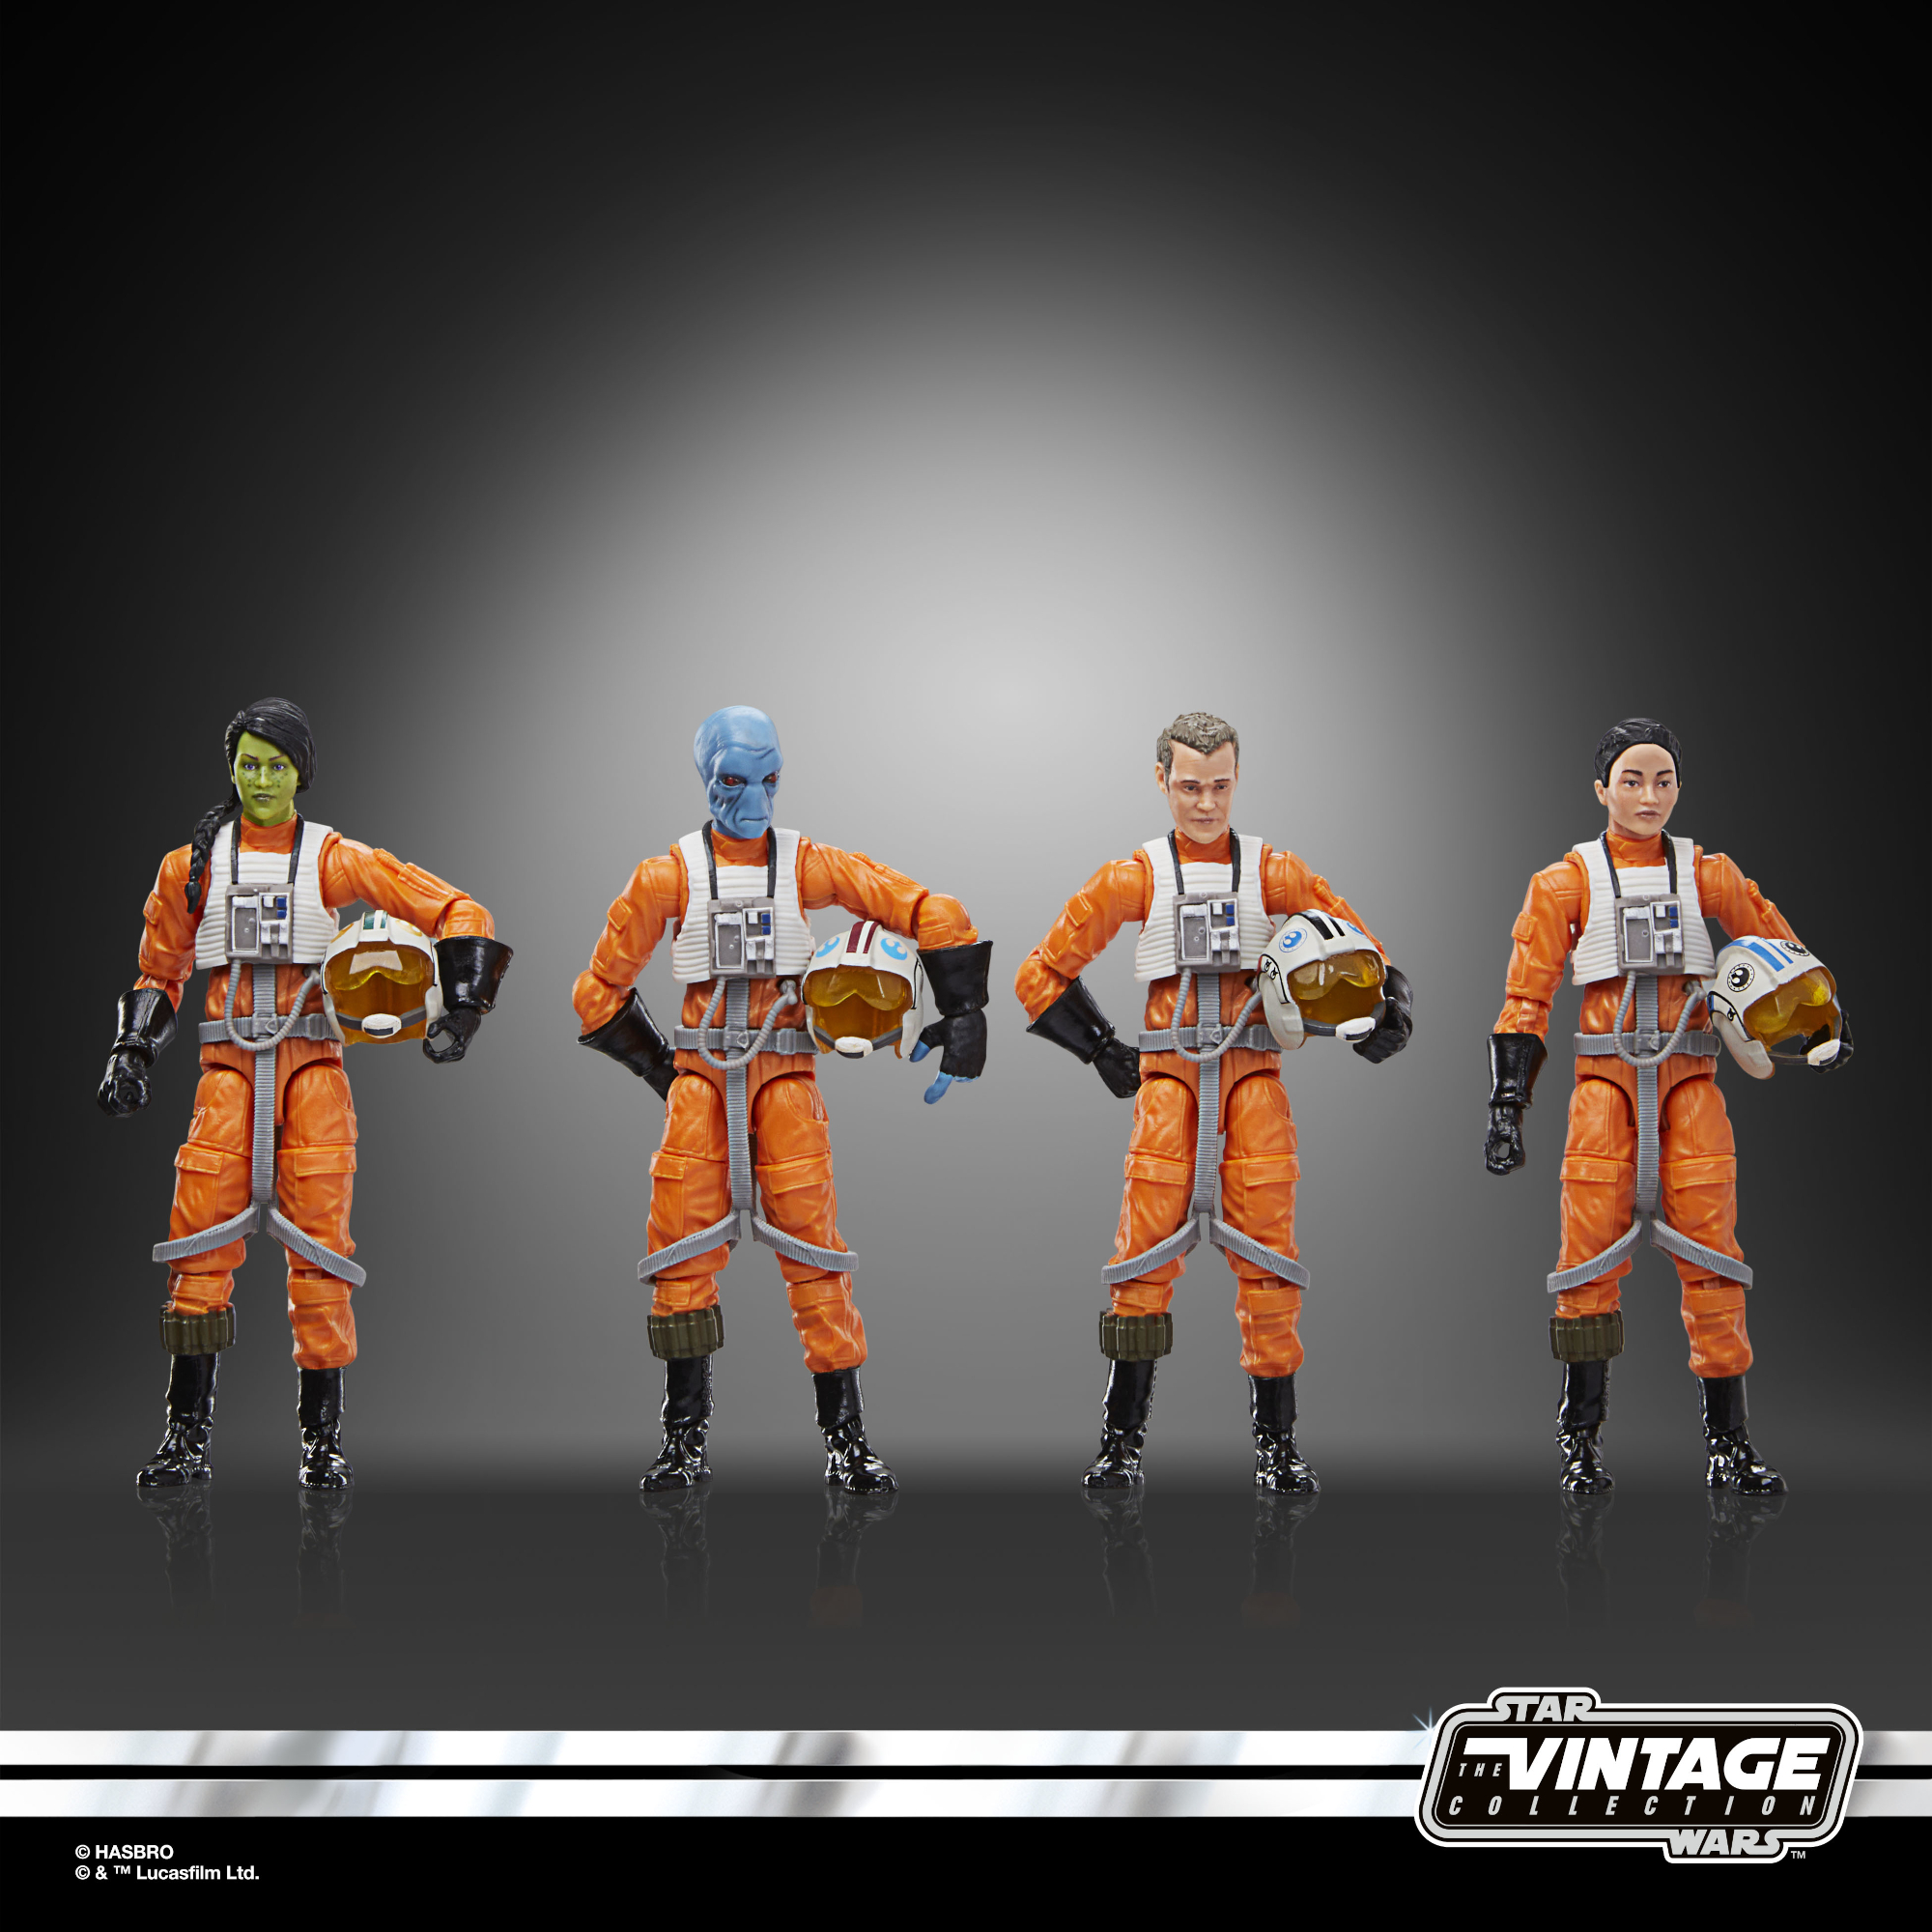 Star Wars The Vintage Collection action figures on a gray background, with a logo along the bottom of the image